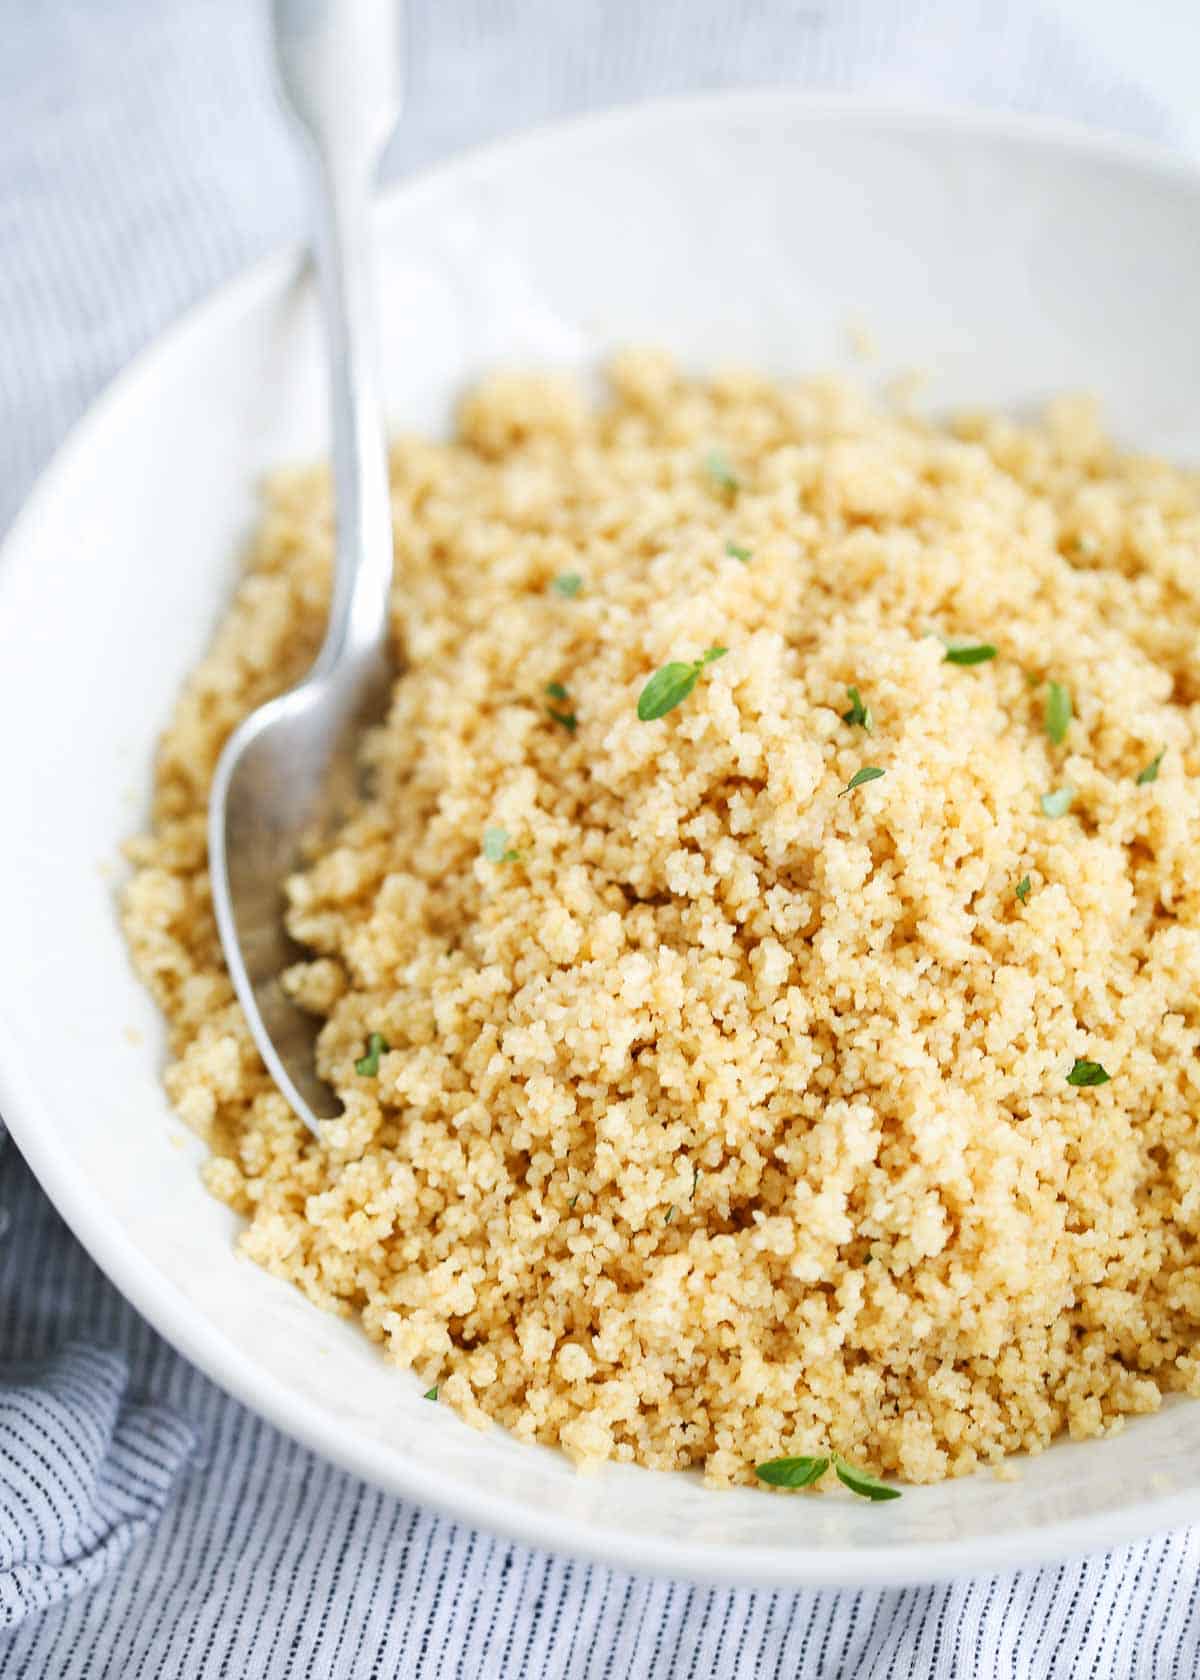 Couscous in a white bowl with a spoon.